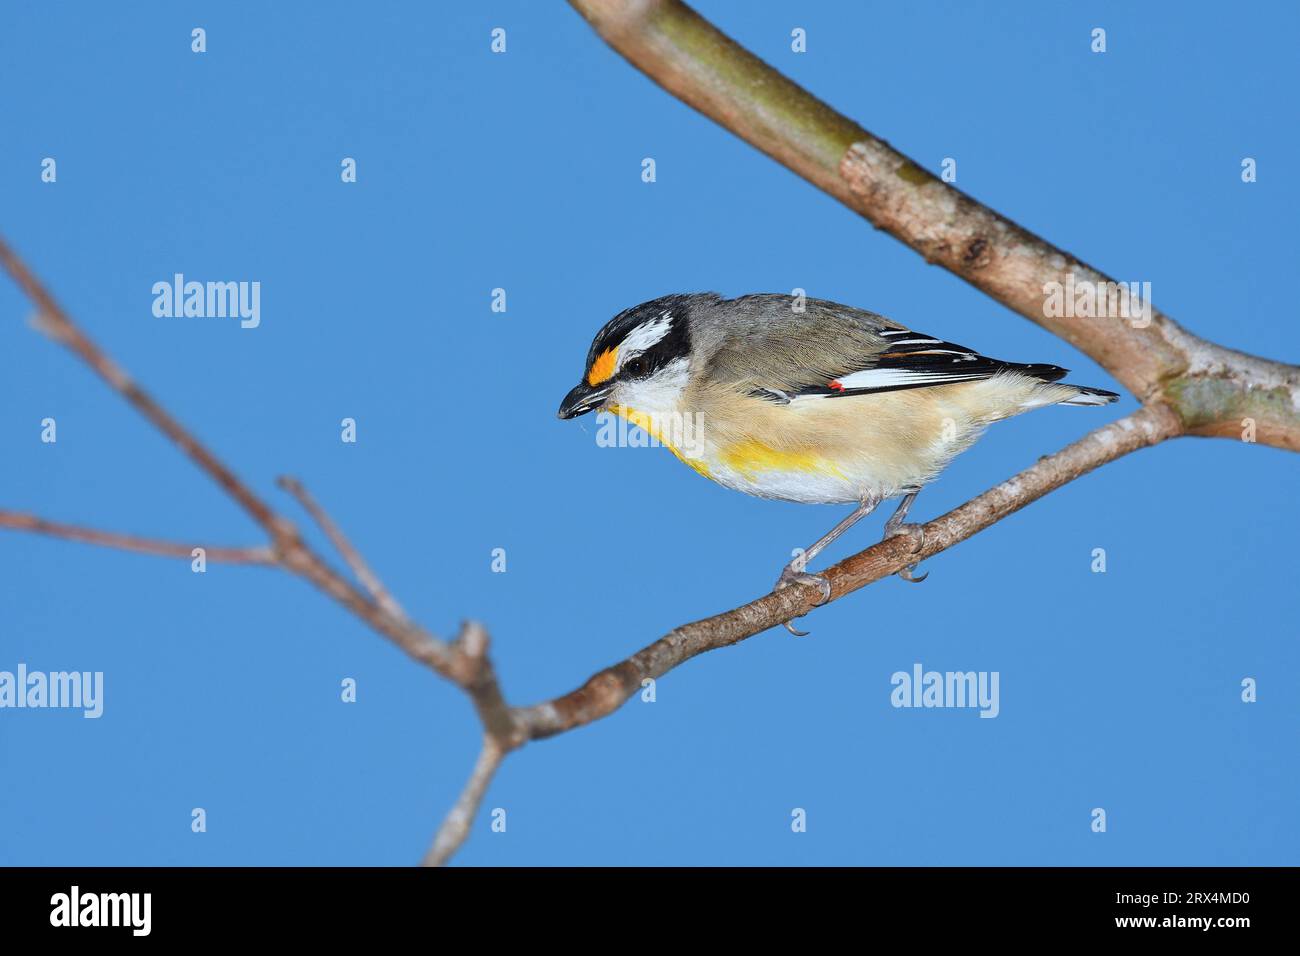 An Australian adult male Striated Pardalote -Pardalotus striatus- bird perched on a branch with a meal in its beak in soft early morning sunlight Stock Photo